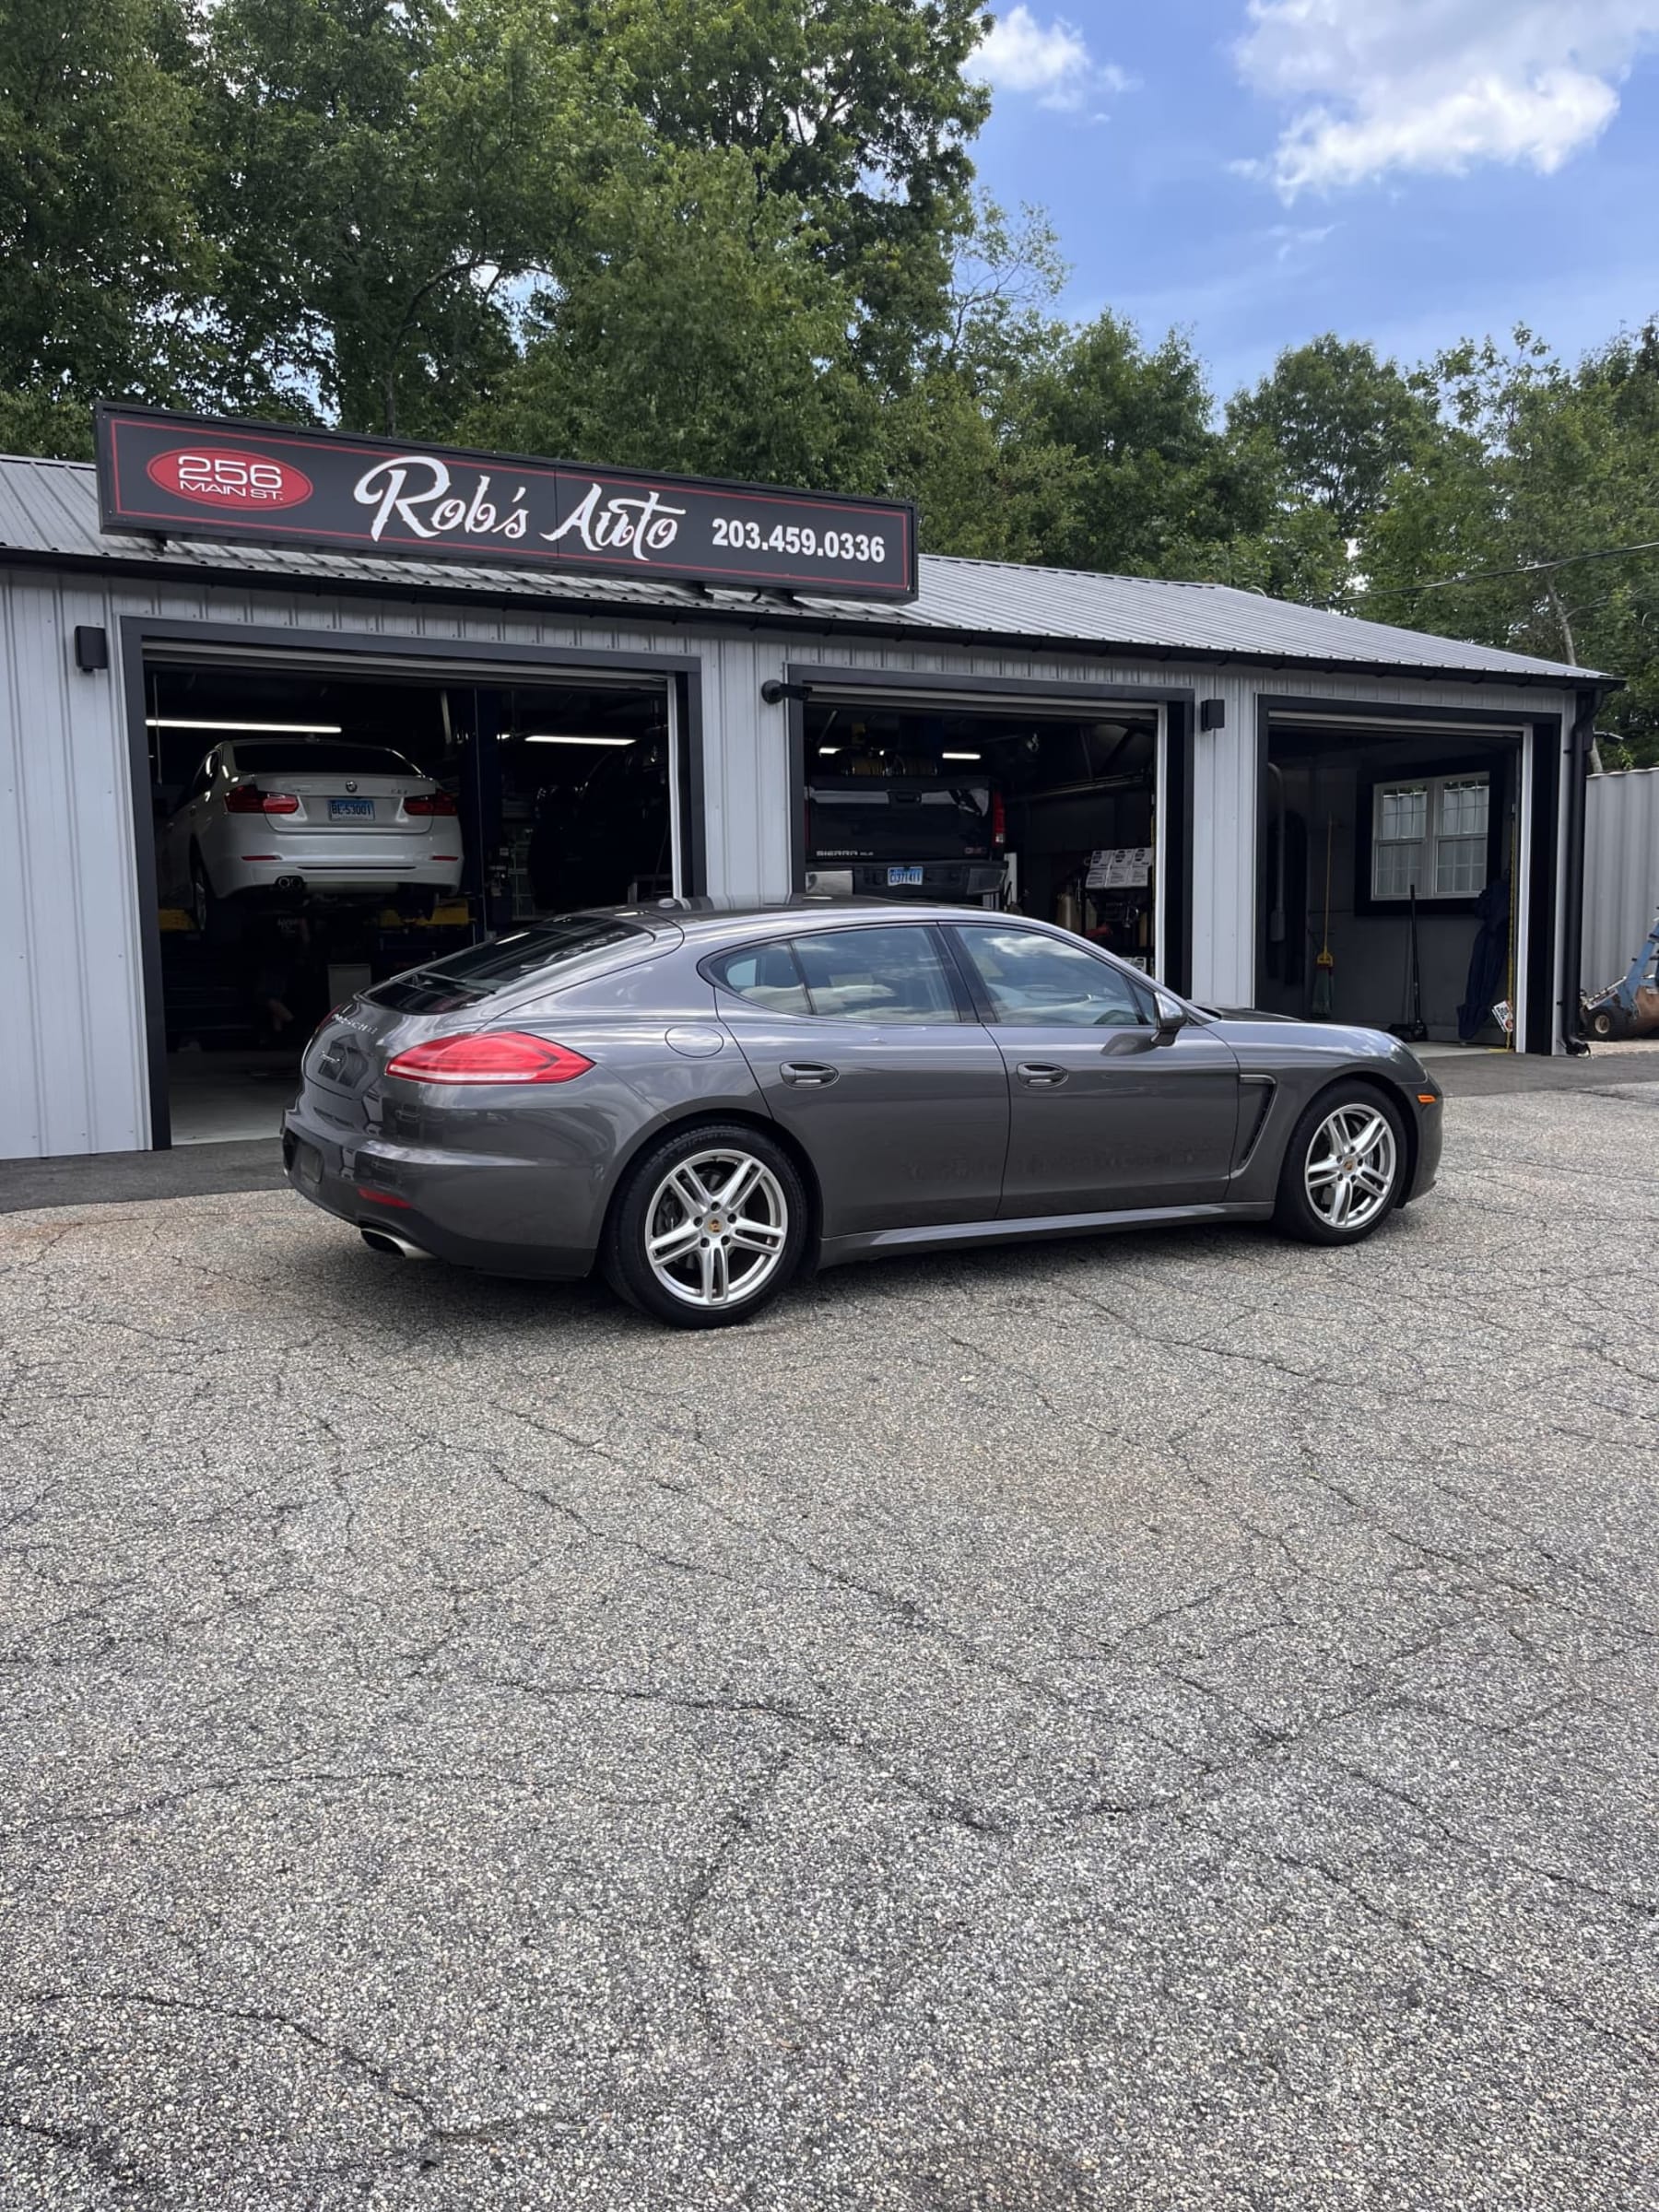 NEW ARRIVAL!! 2015 Porsche Panamera 4!! AWD! One Owner! Clean Carfax! Loaded with Navigation, Heated and Cooled Seats, Heated Rear seats, 19” wheels, Front and Rear park assist, Premium Package, Bose sound system and much much more! Original window sticker was $93,700! Won’t last at Only $25,900!!